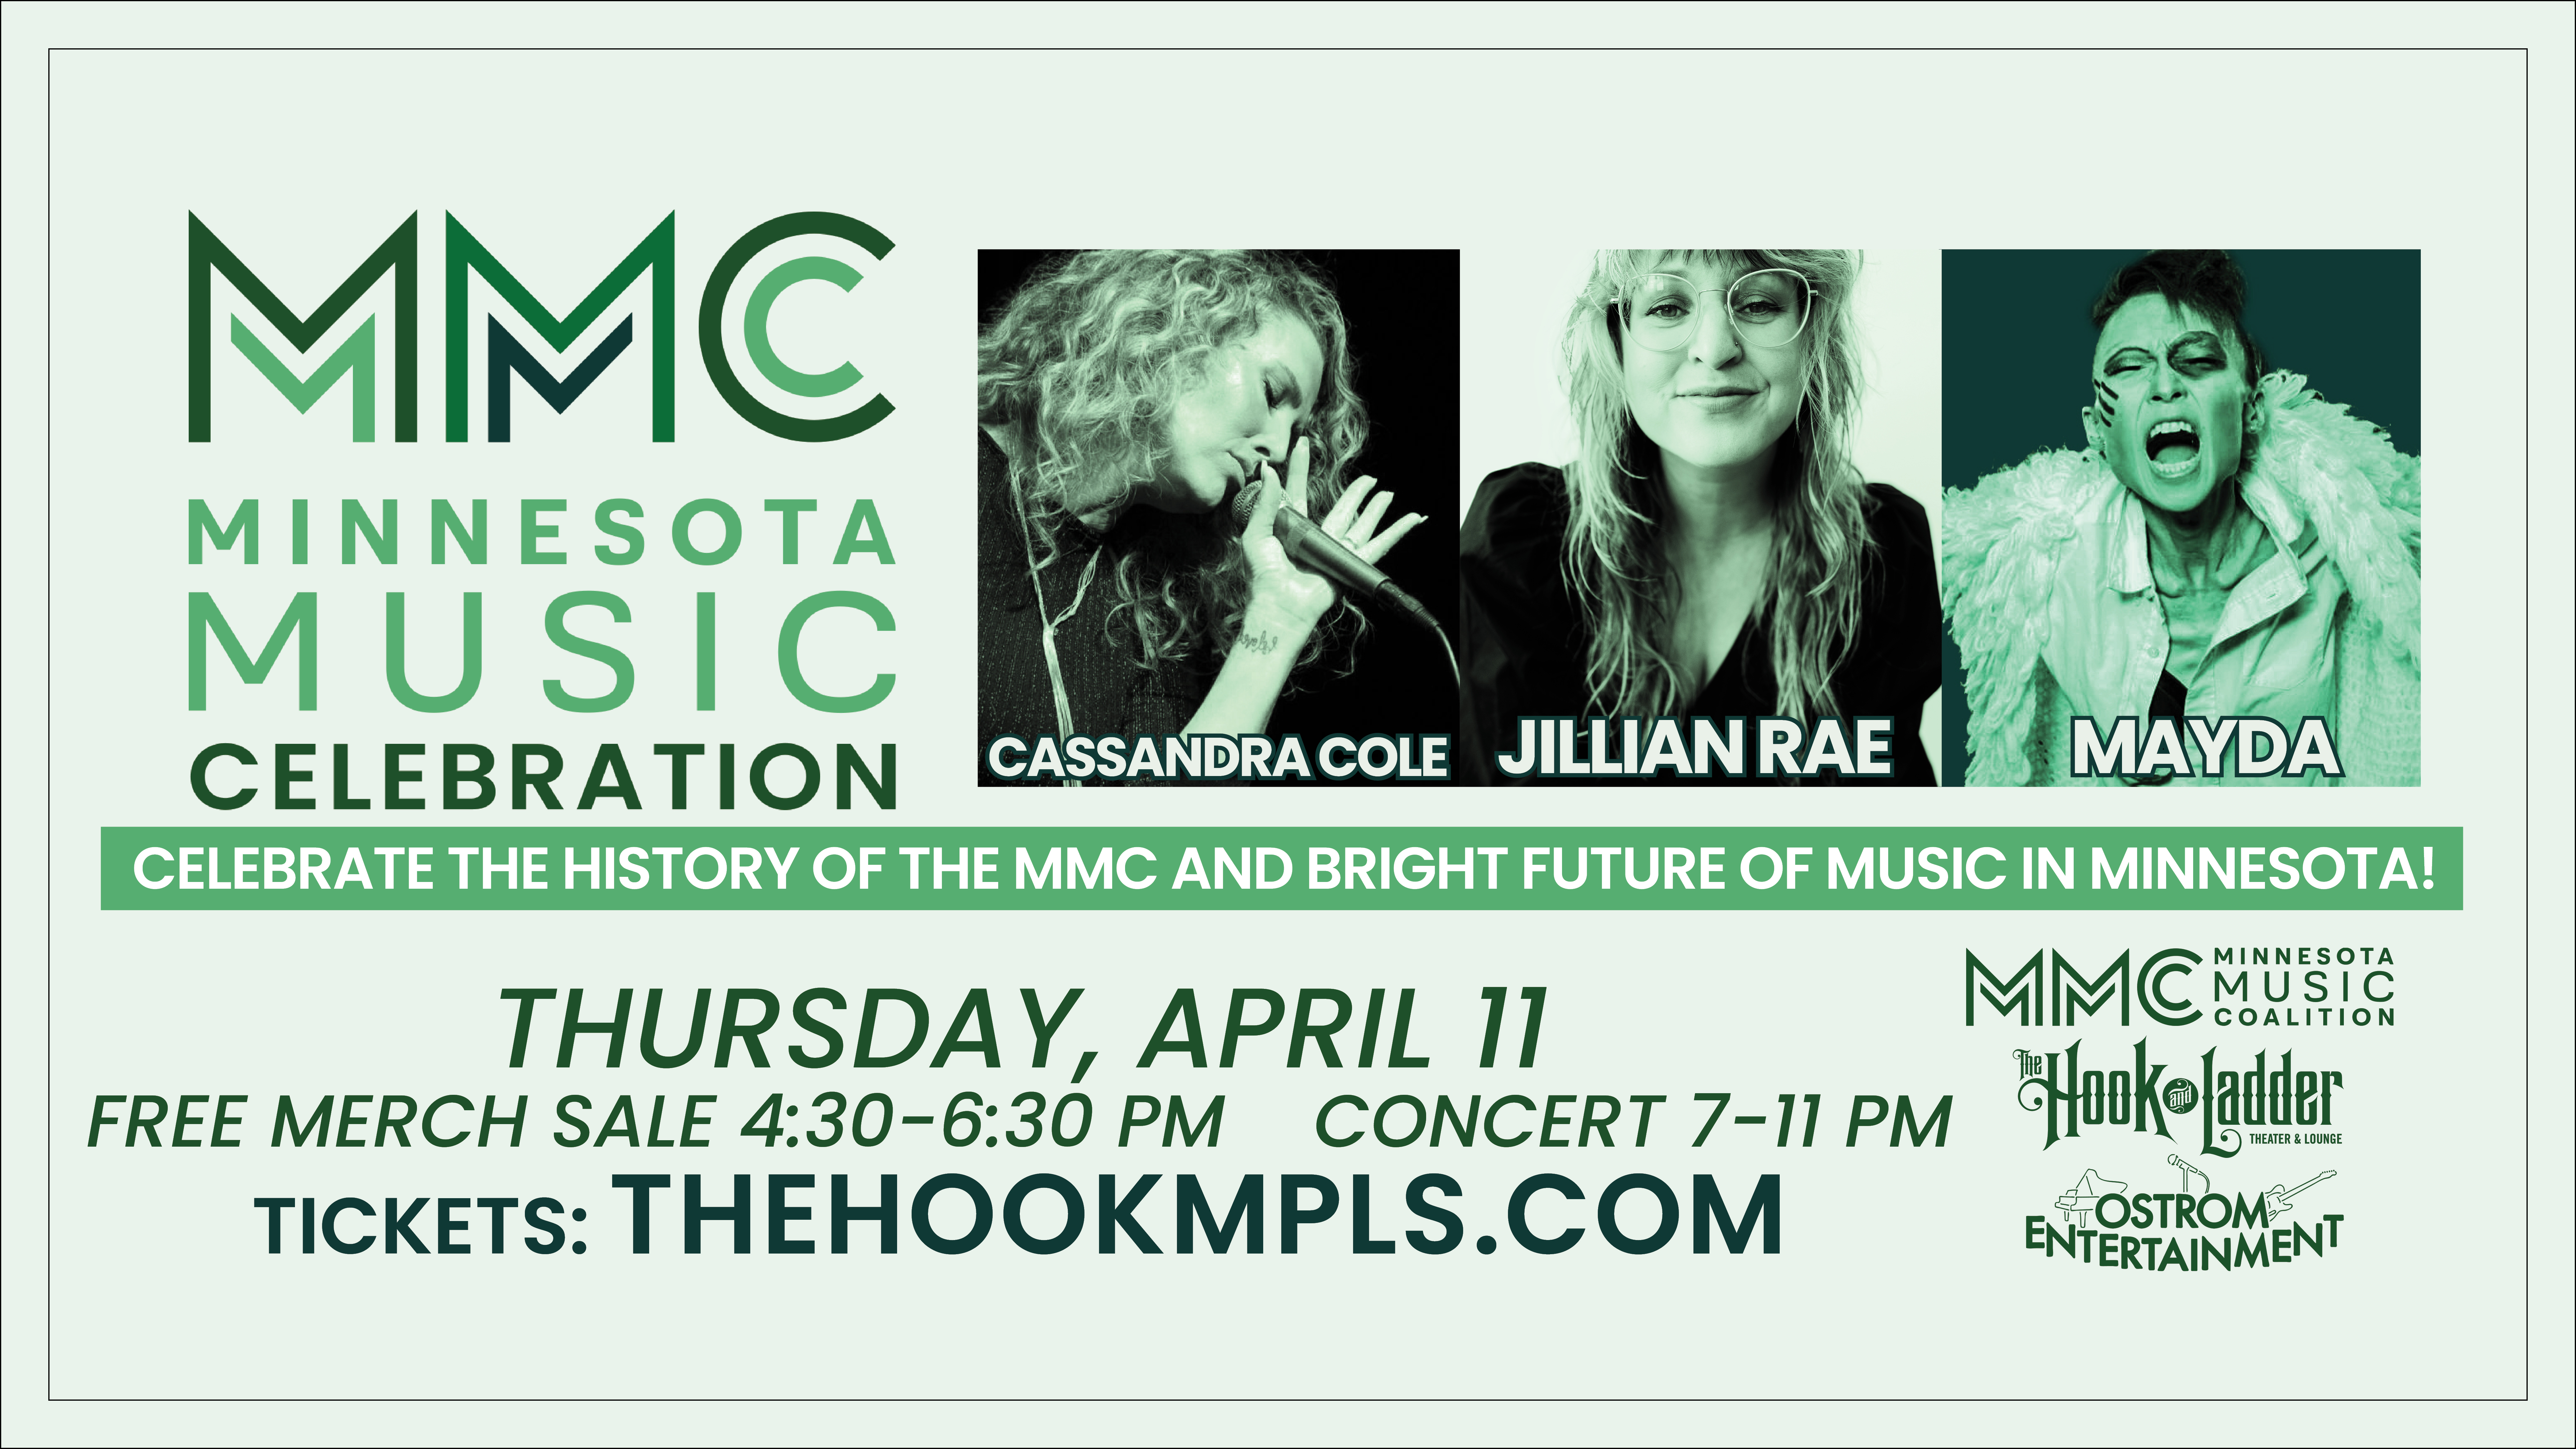 Minnesota Music Coalition presents MMC: Minnesota Music Celebration featuring Cassandra Cole, Jillian Rae, & Mayda A Celebration of the Minnesota Music Coalition's important legacy of advocating for independent musicians. Thursday, April 11 The Hook and Ladder Theater Doors 7:00pm :: Music 7:30pm :: 21+ GA $15 ADV / $20 DOS NO REFUNDS Ticket On-Sale Now